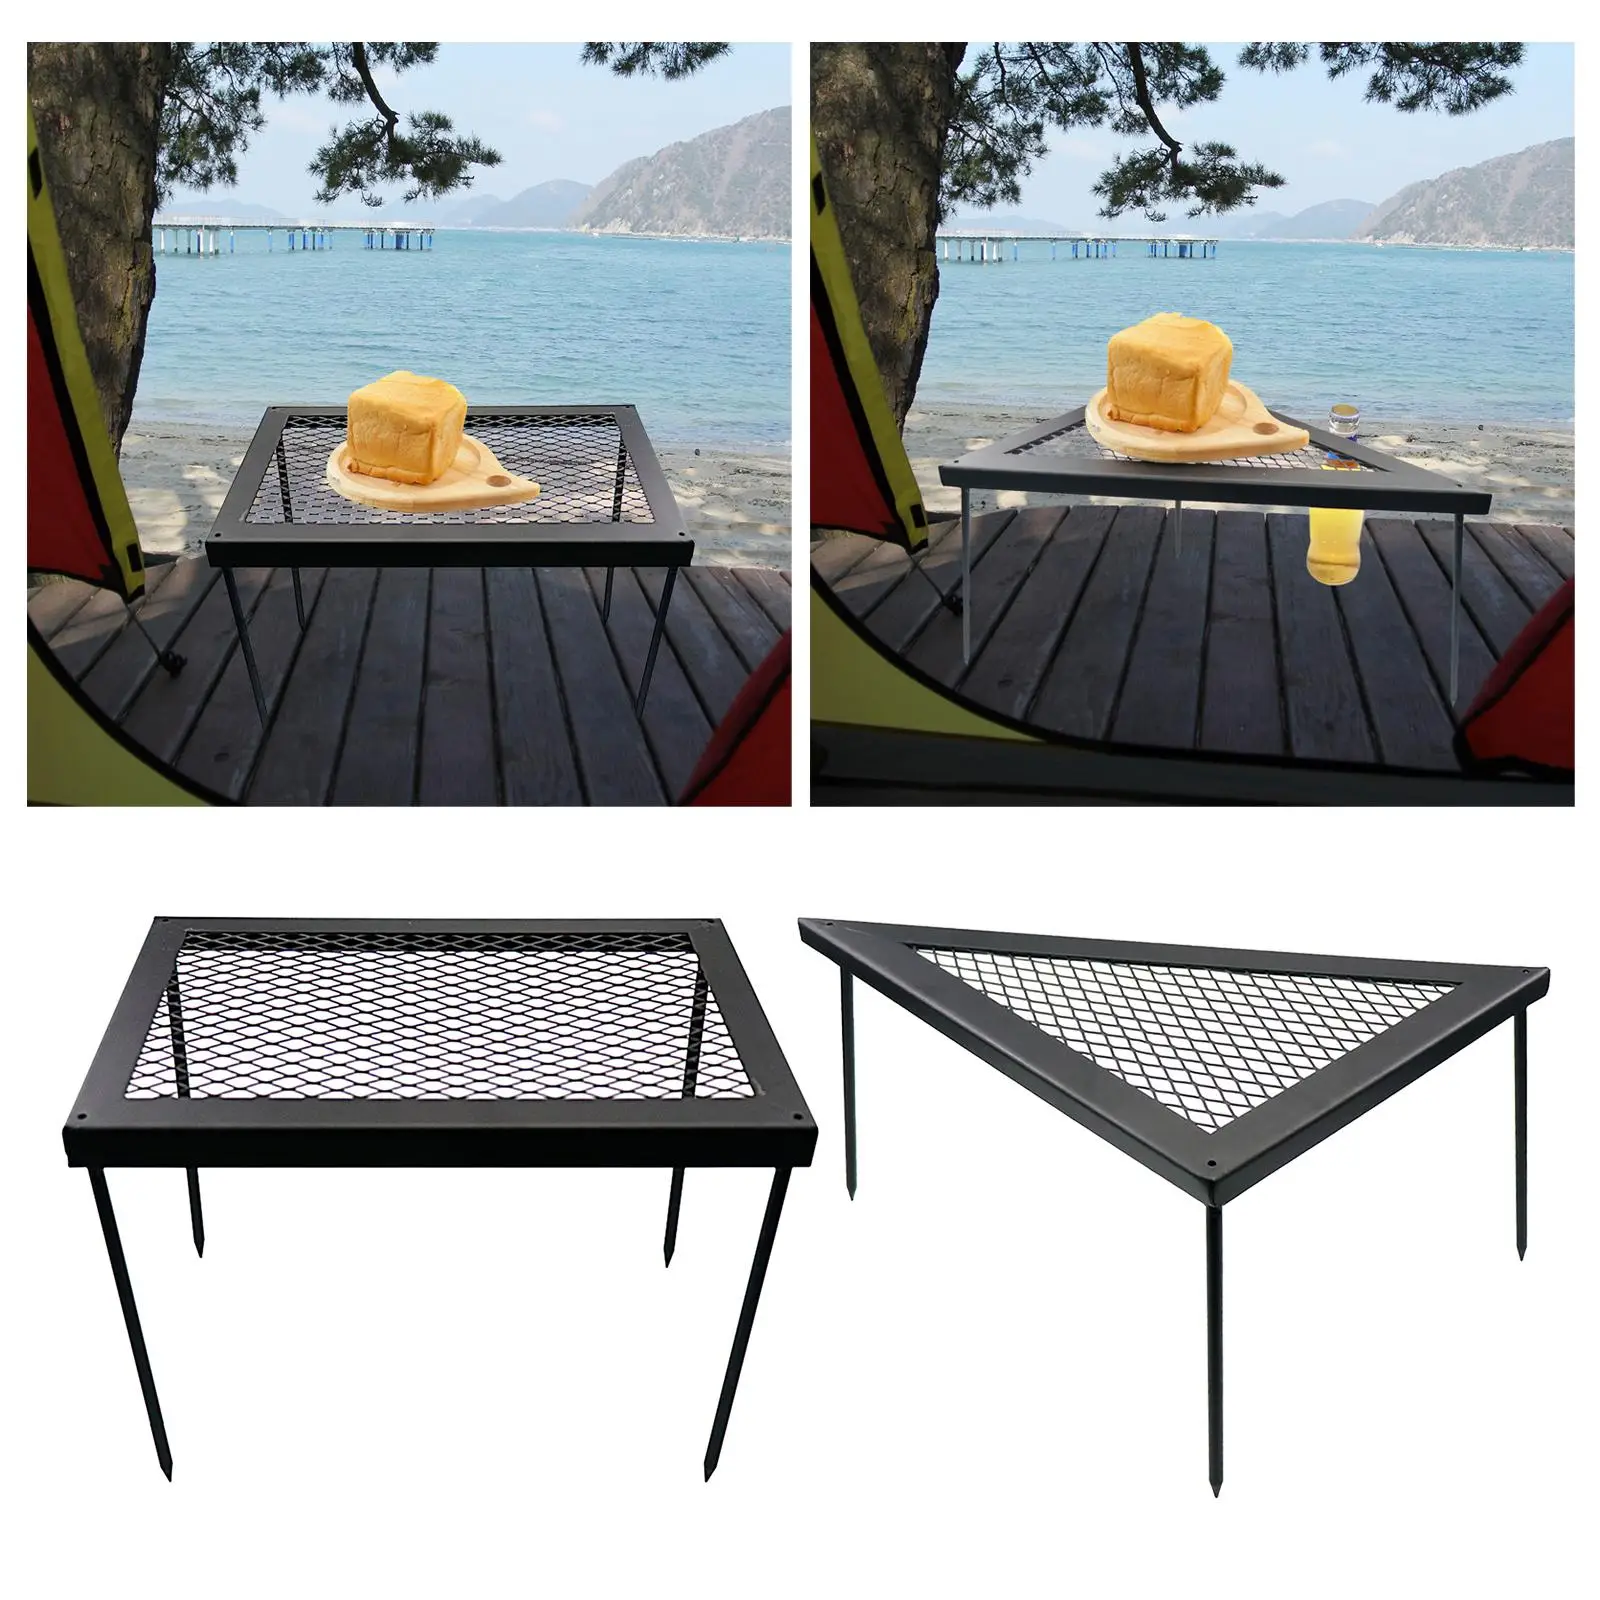 Camping Triangle Iron Desk Adjustable Shelf Anti-Scalding Campfire Rack for Outdoor grill per bbq 